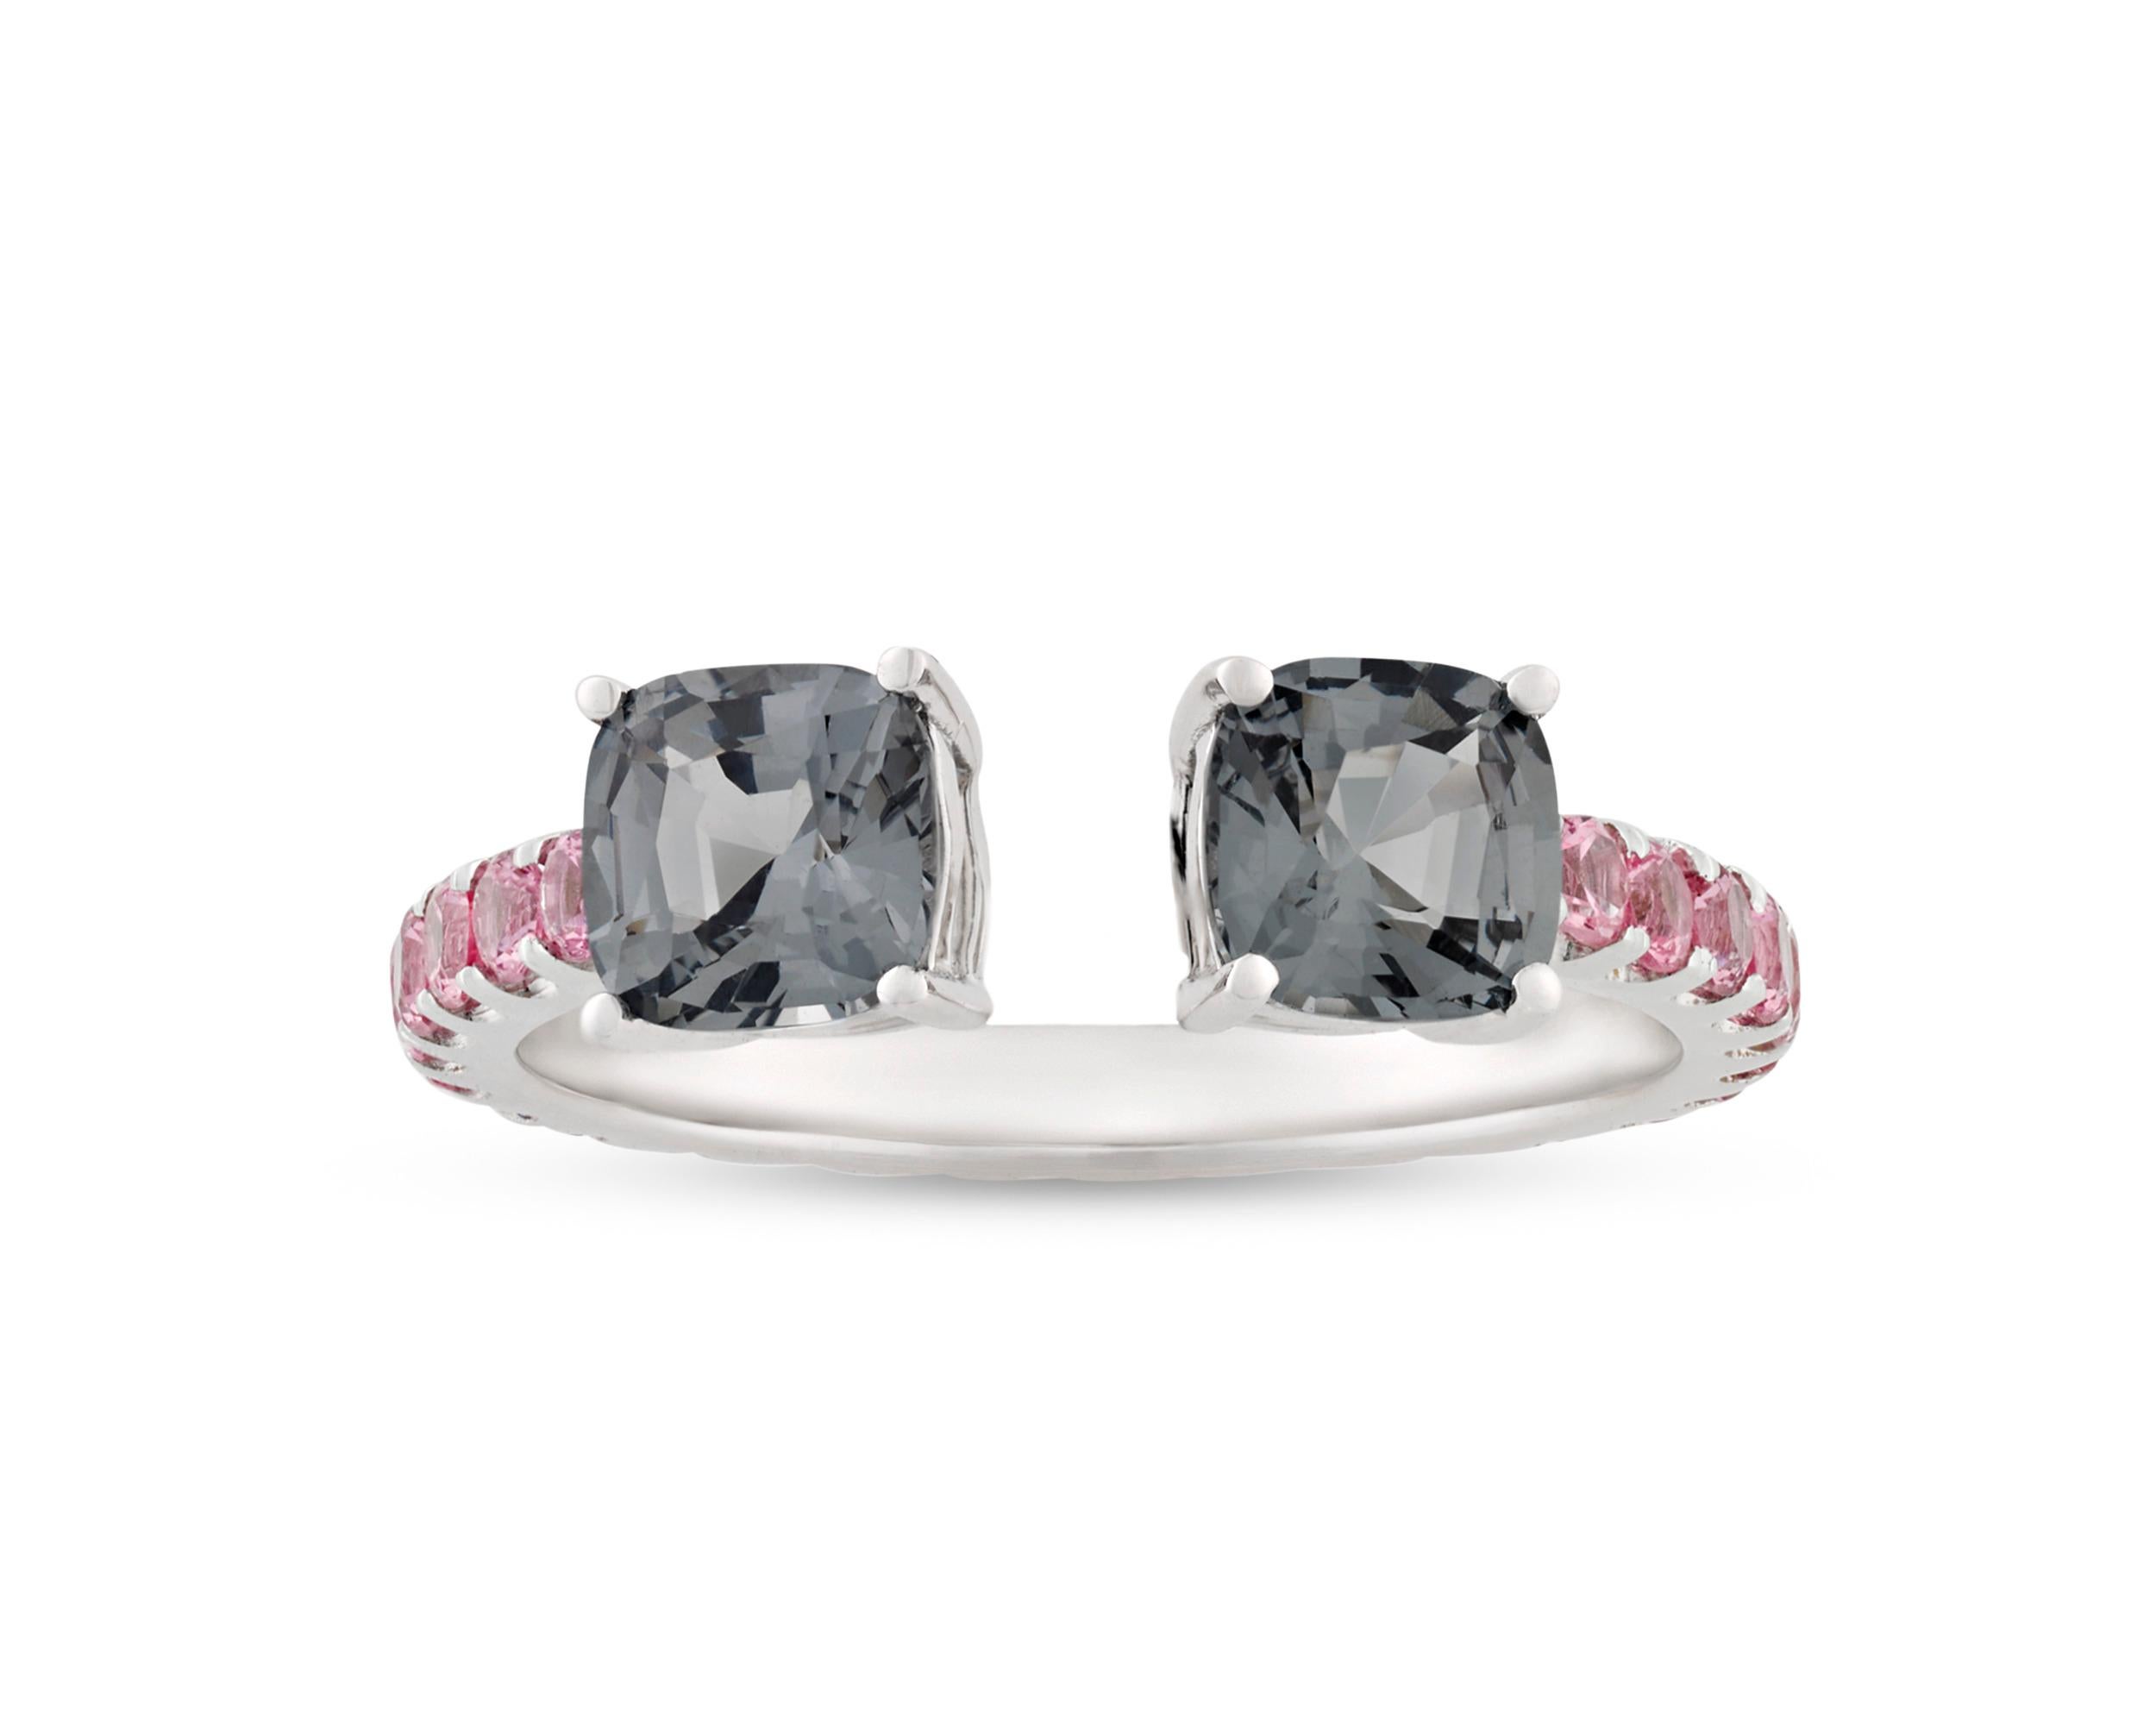 A pair of deep gray spinels weighing a combined 1.48 carats sit opposite each other in this one-of-a-kind wrap ring. The richly colored stones are contrasted by a collection of pink spinels totaling 0.92 carat set within the 18K white gold shank.